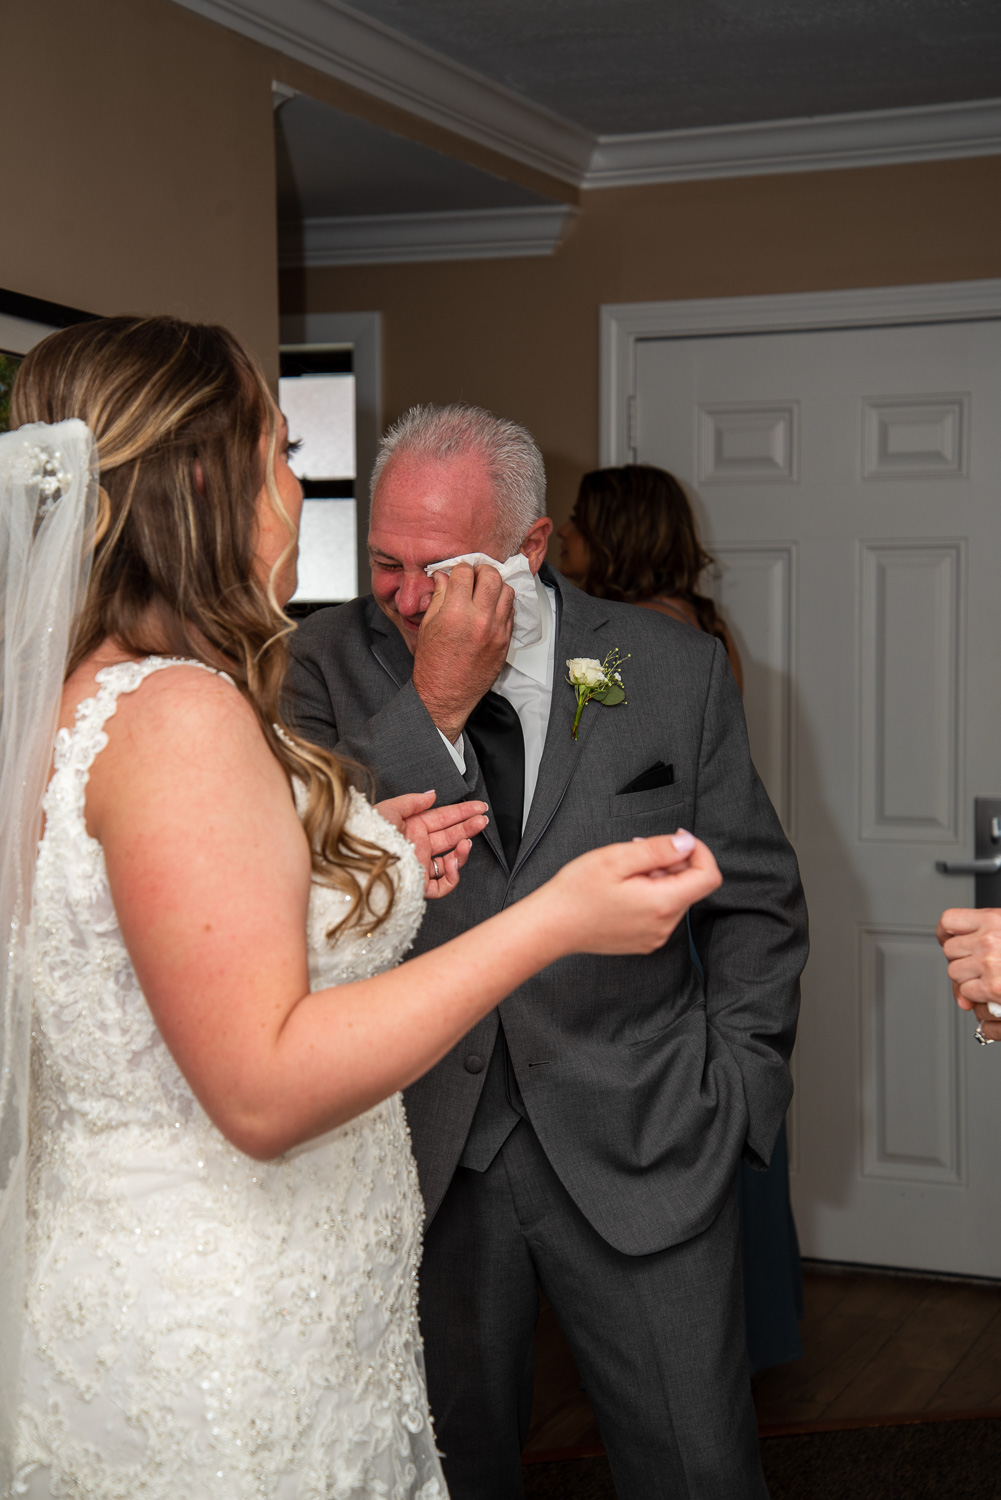 Brides' dad crying after seeing the bride in her wedding dress